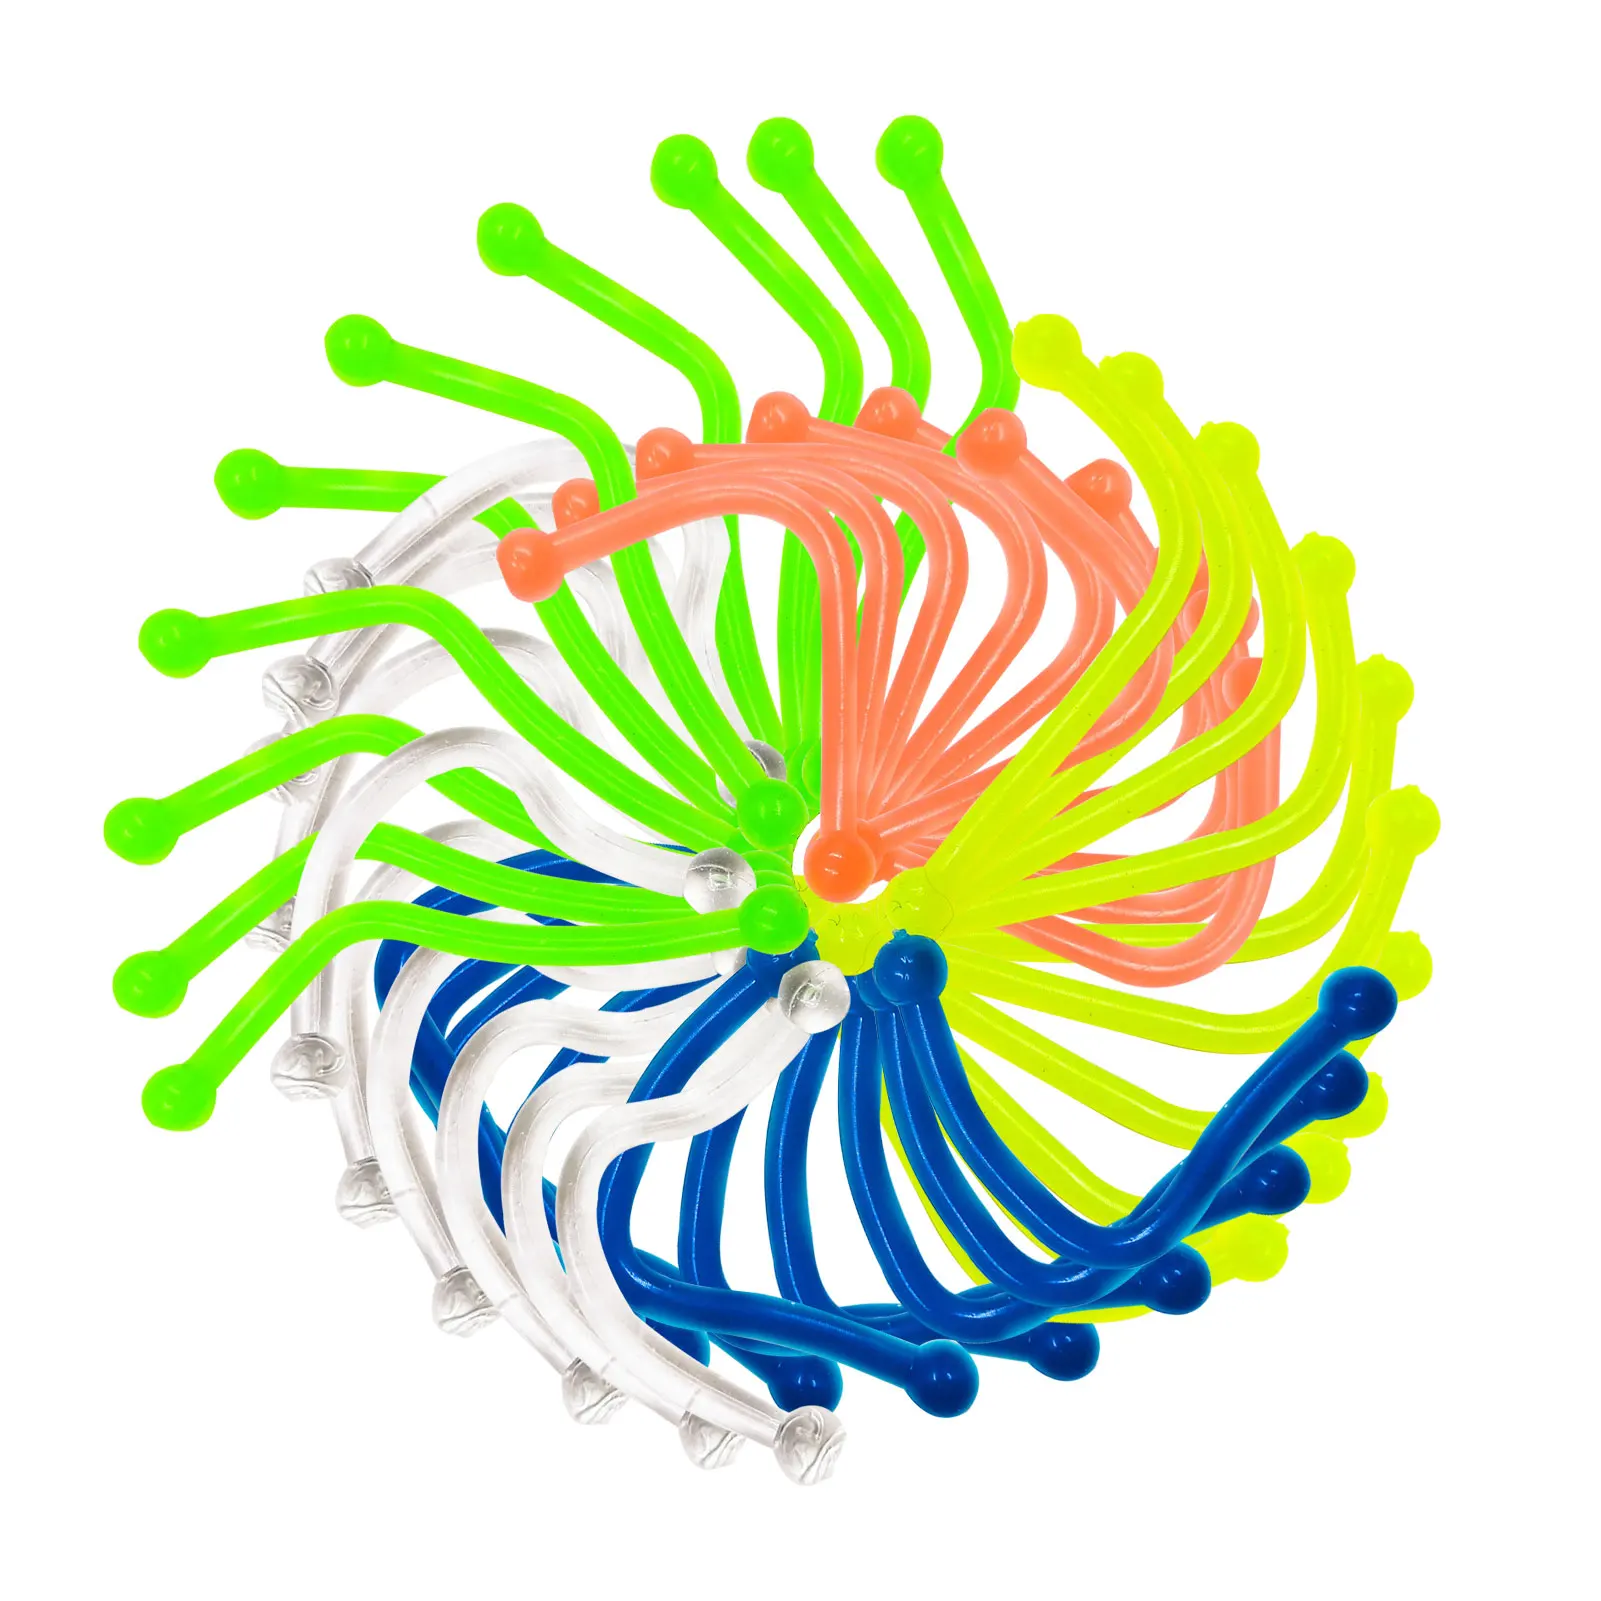 

100pcs Fidgets Twisting Toys Decompression Toy Deformation Rope Stretched TPR Noodle Stretch Stress Relief Kids Adults Squishy